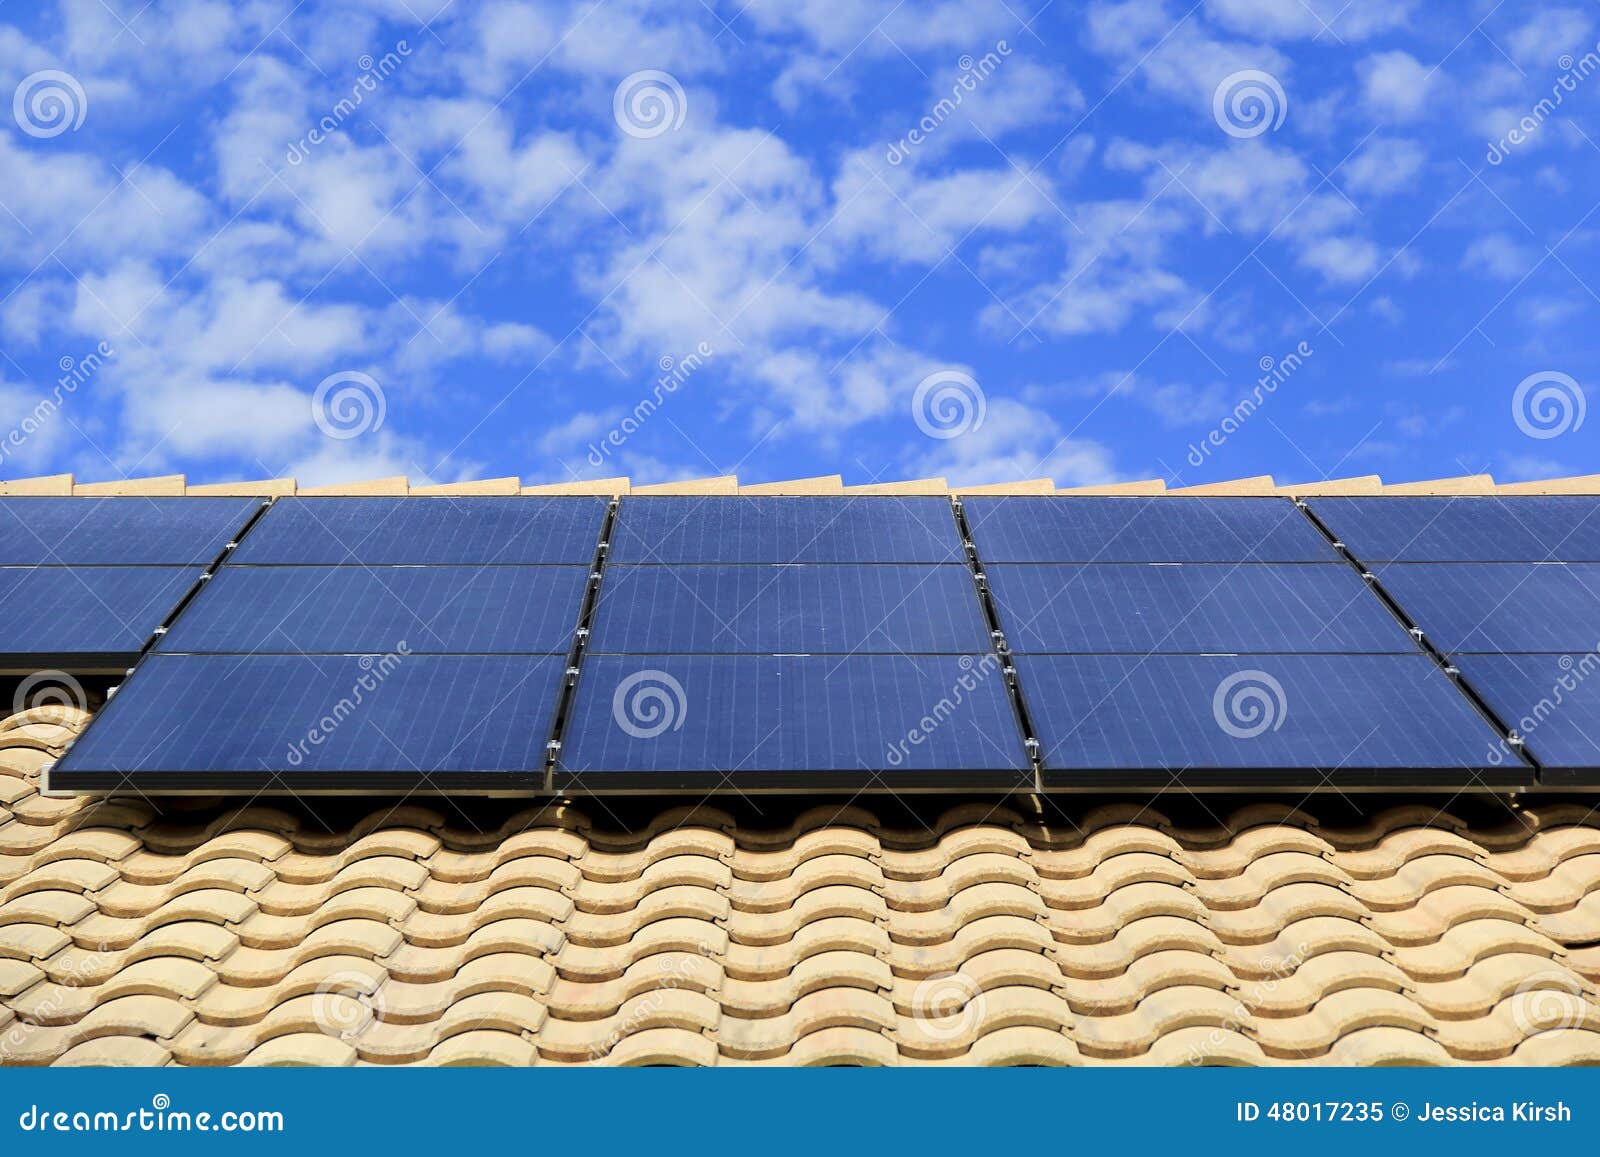 rooftop solar panels on a southwestern style house